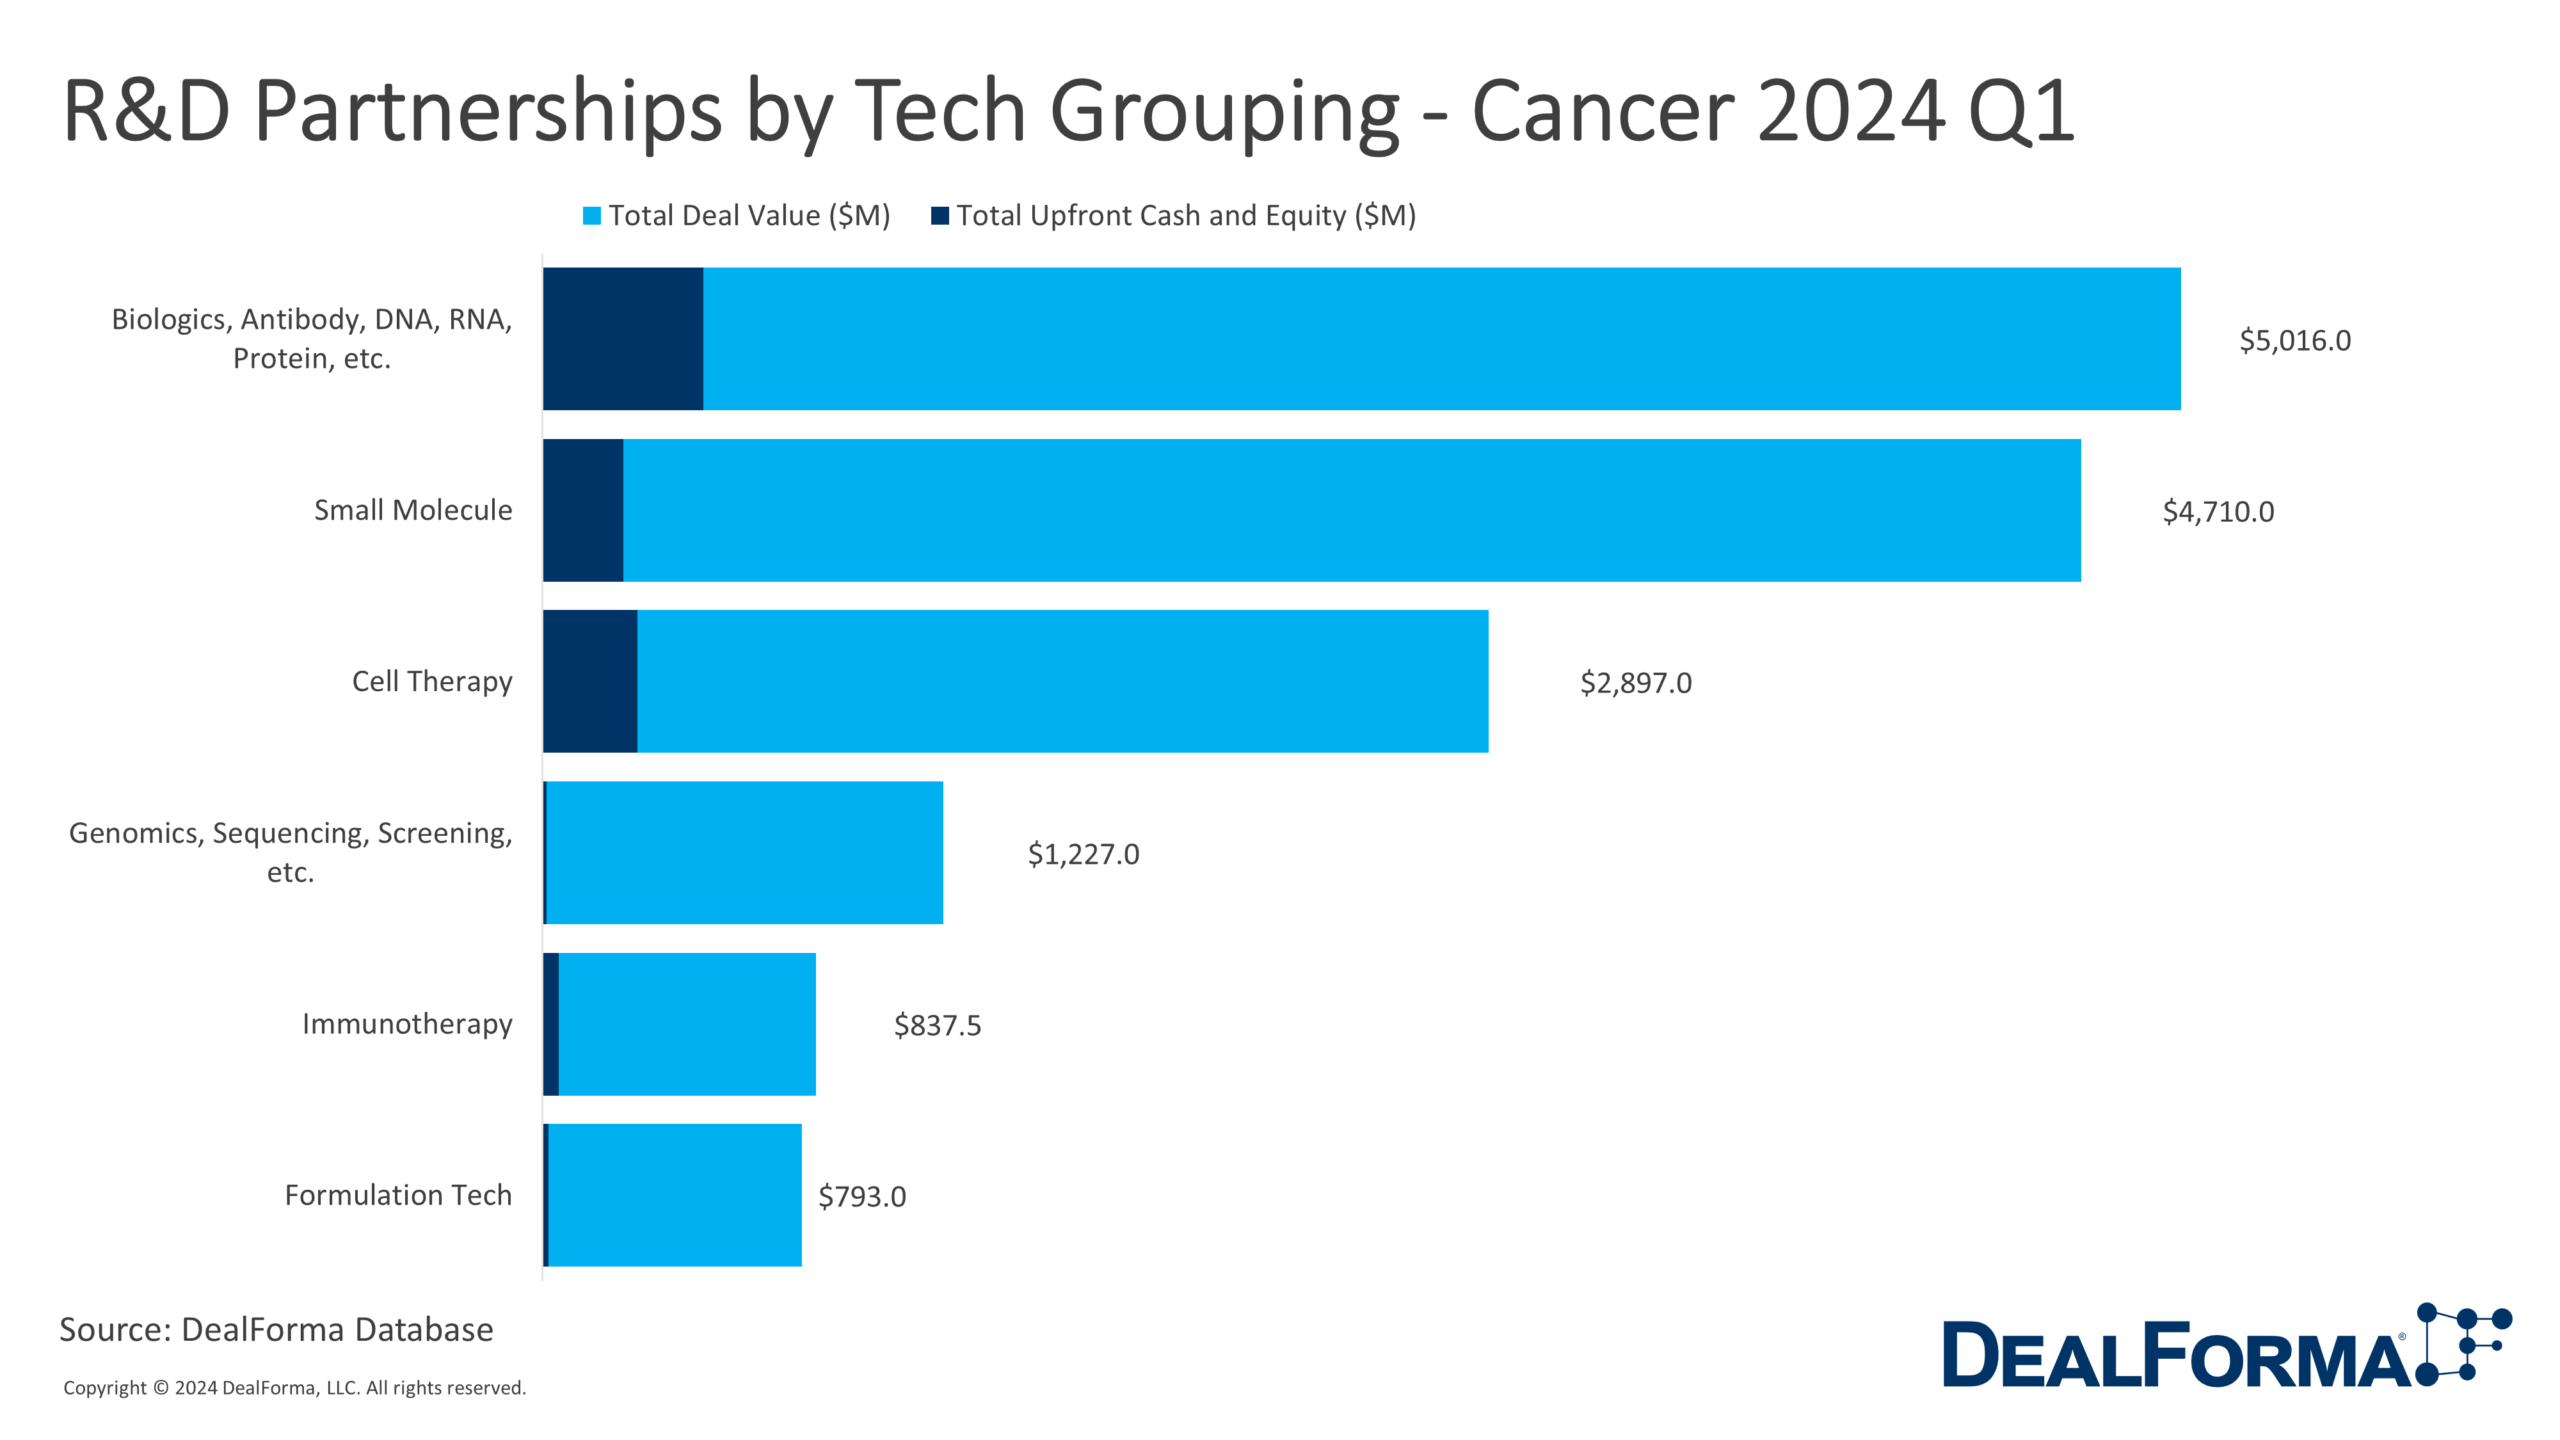 Venture by Tech Grouping - Cancer